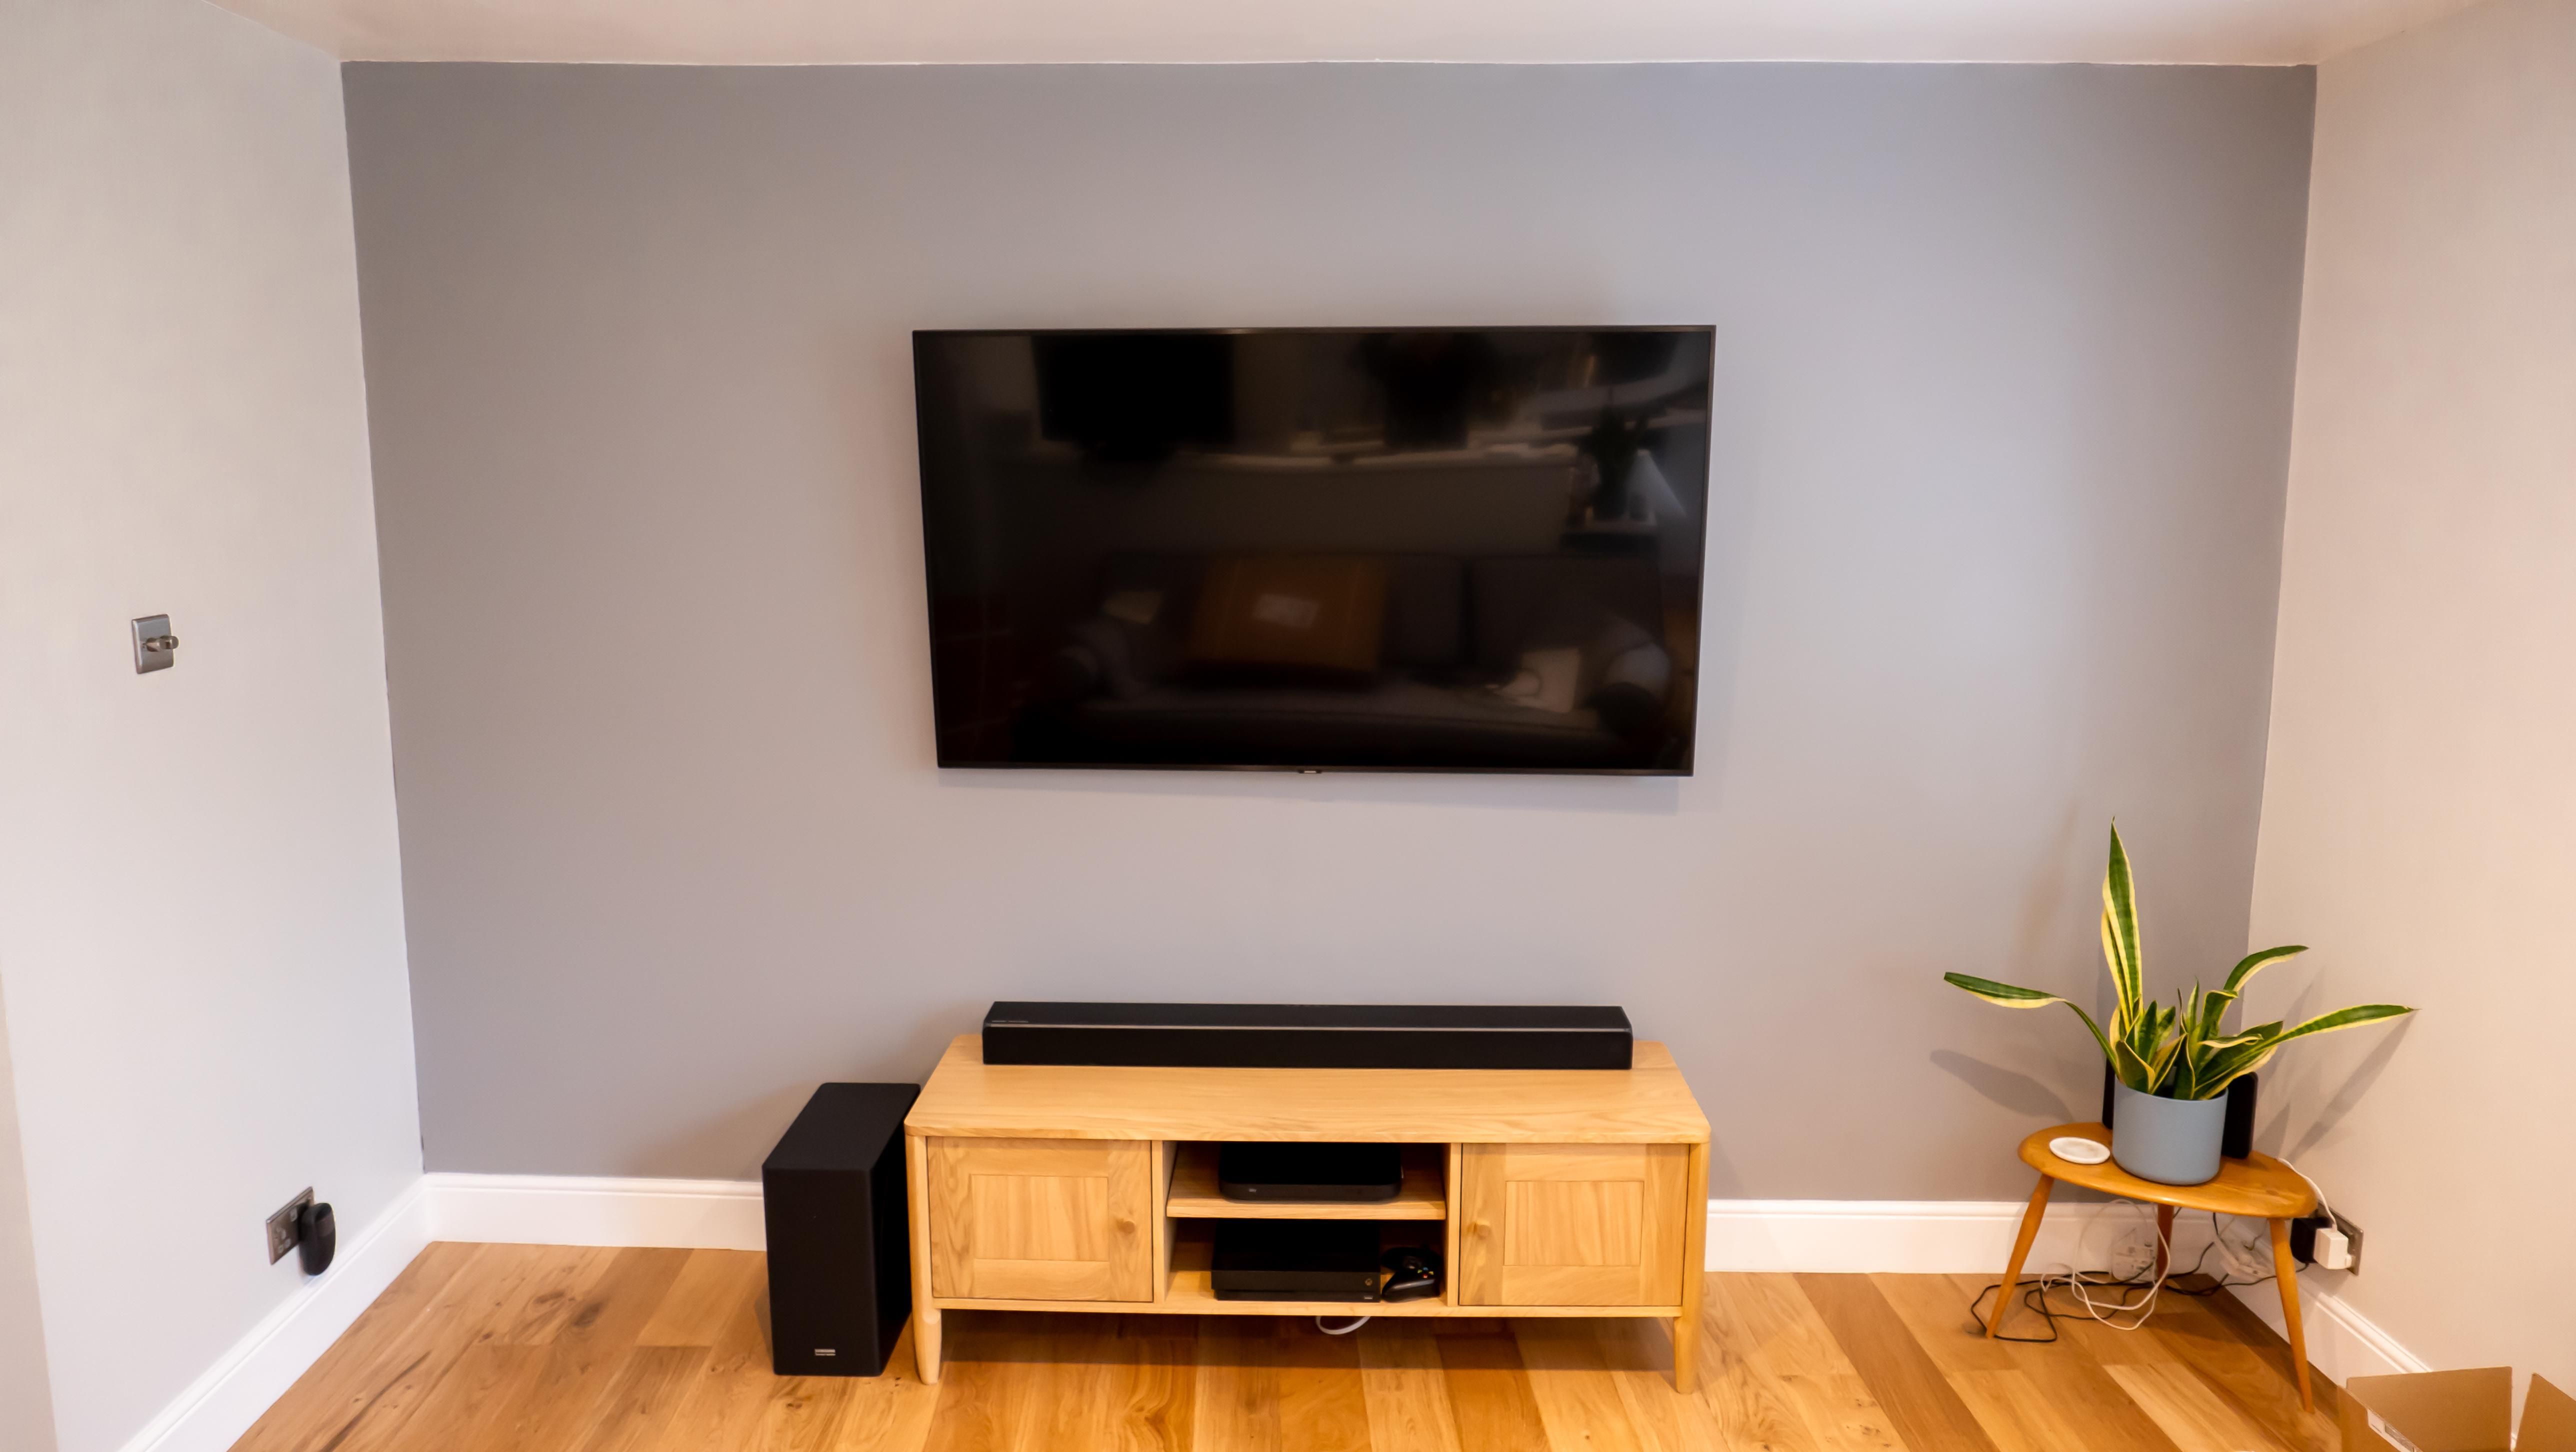 Wall-mounted television